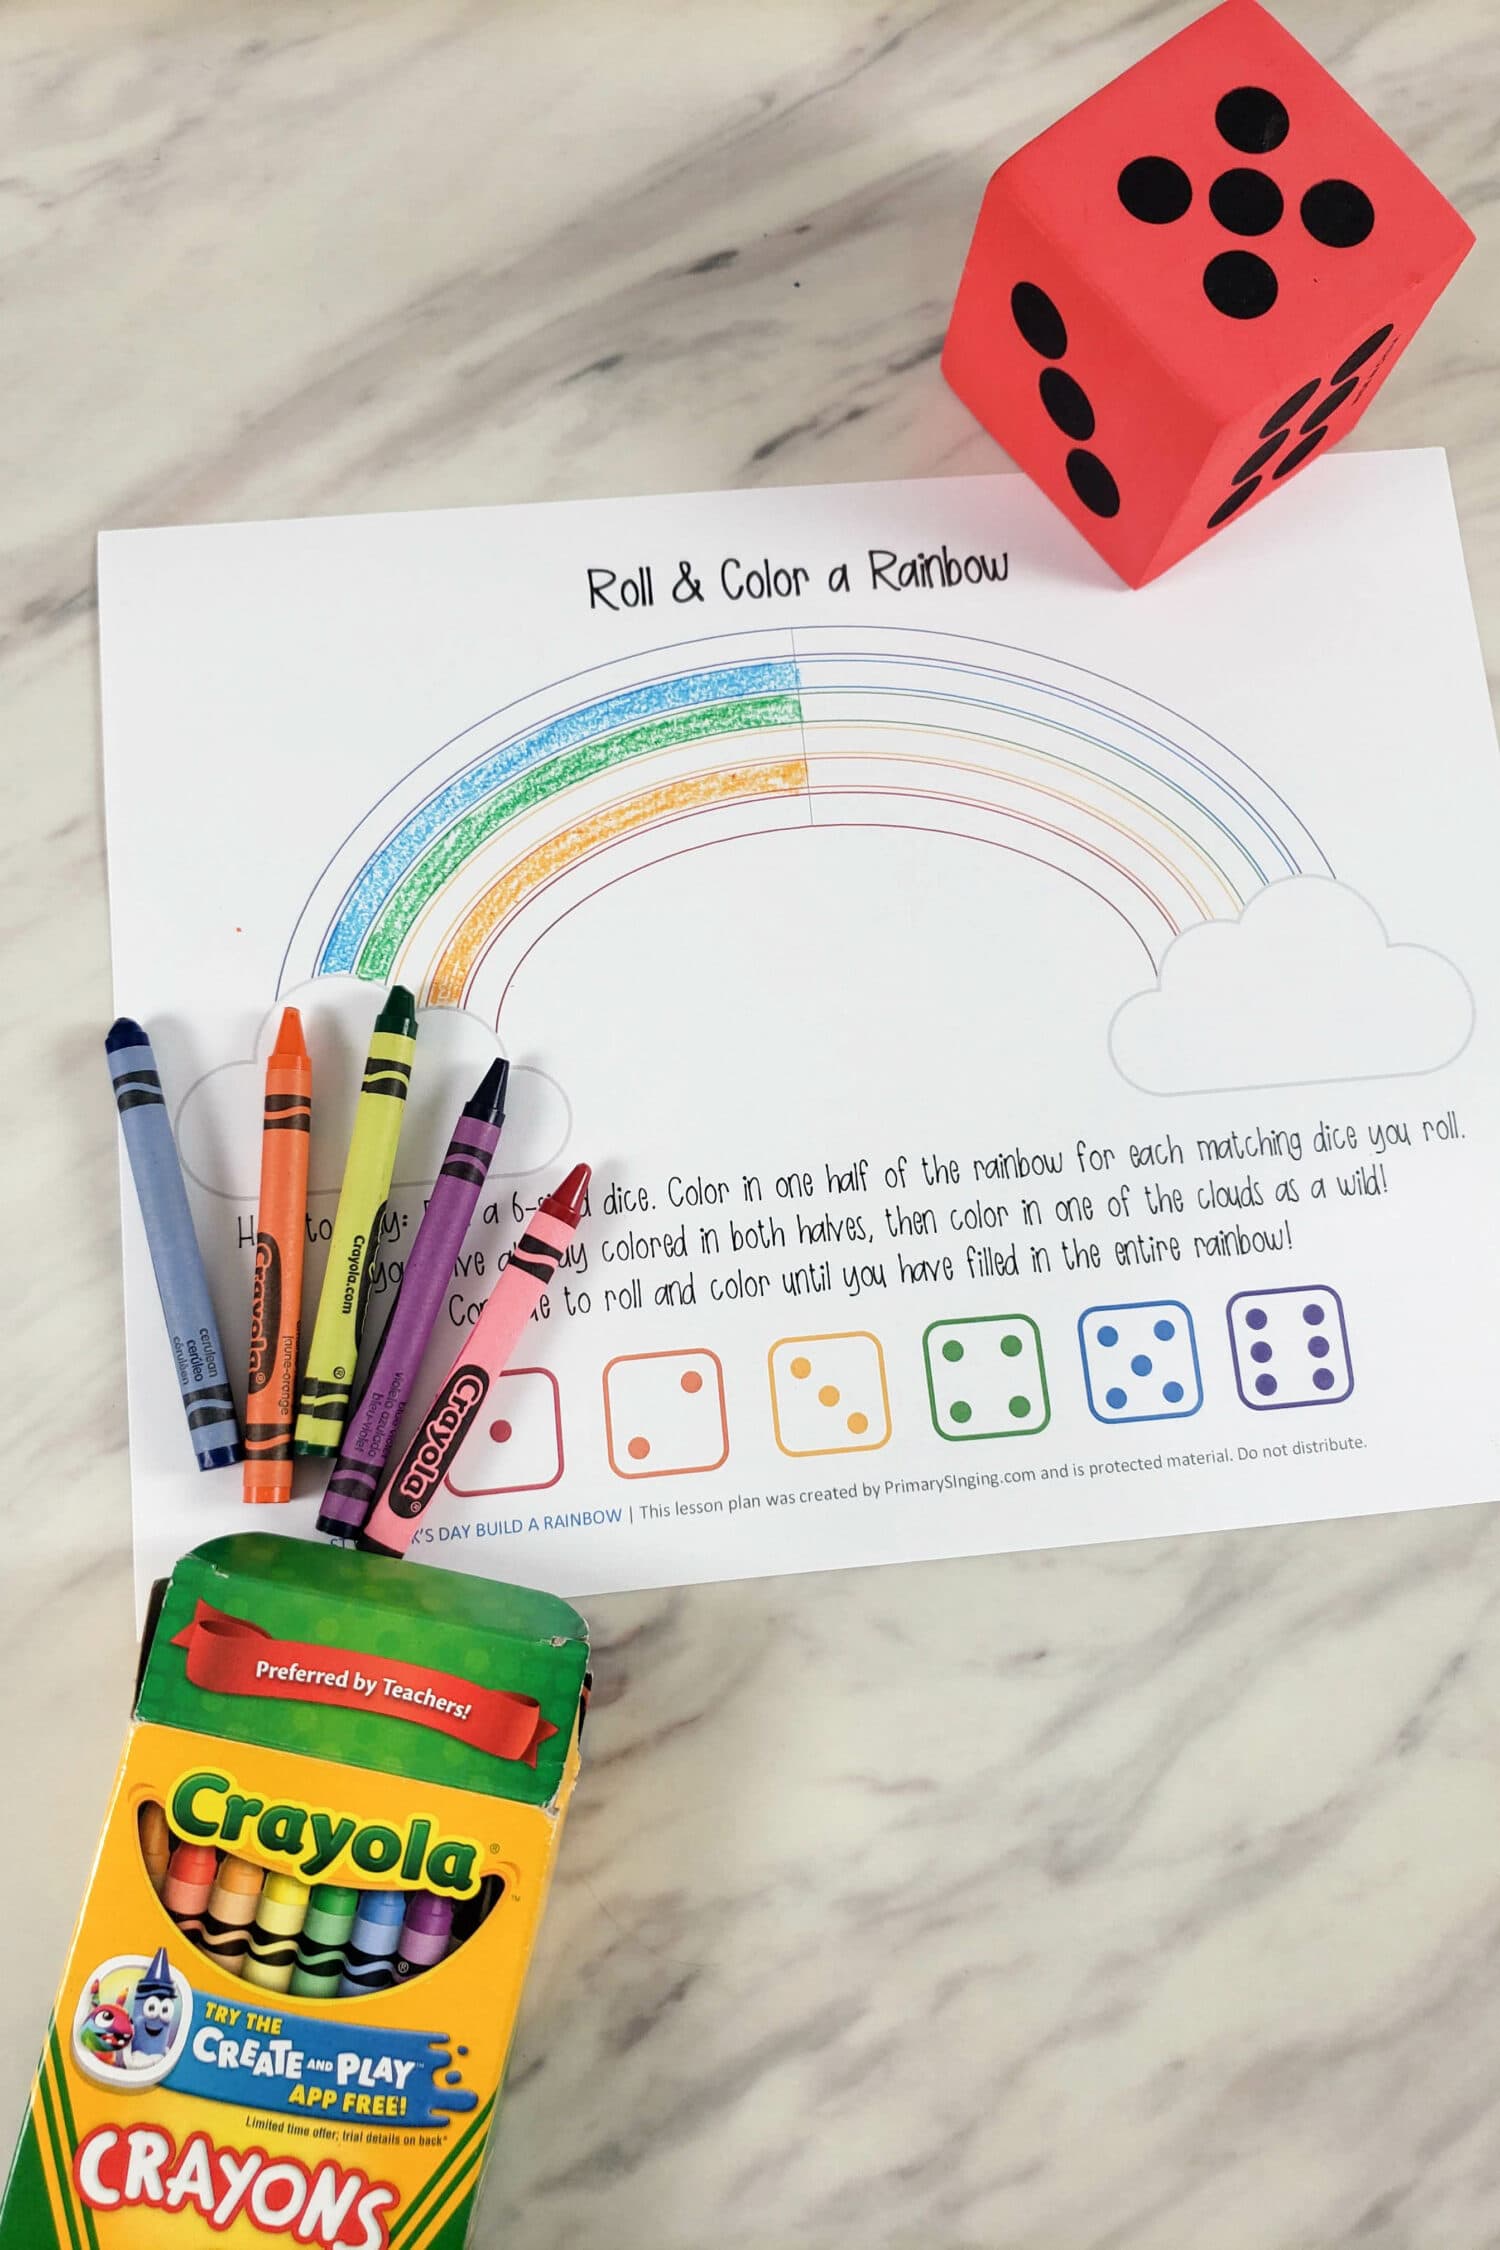 Printable Color the Rainbow rolling dice game for St Patrick's Day. Fun and easy game like the classic Cootie game. Free printable lesson plan for music teachers or any home or classroom use.